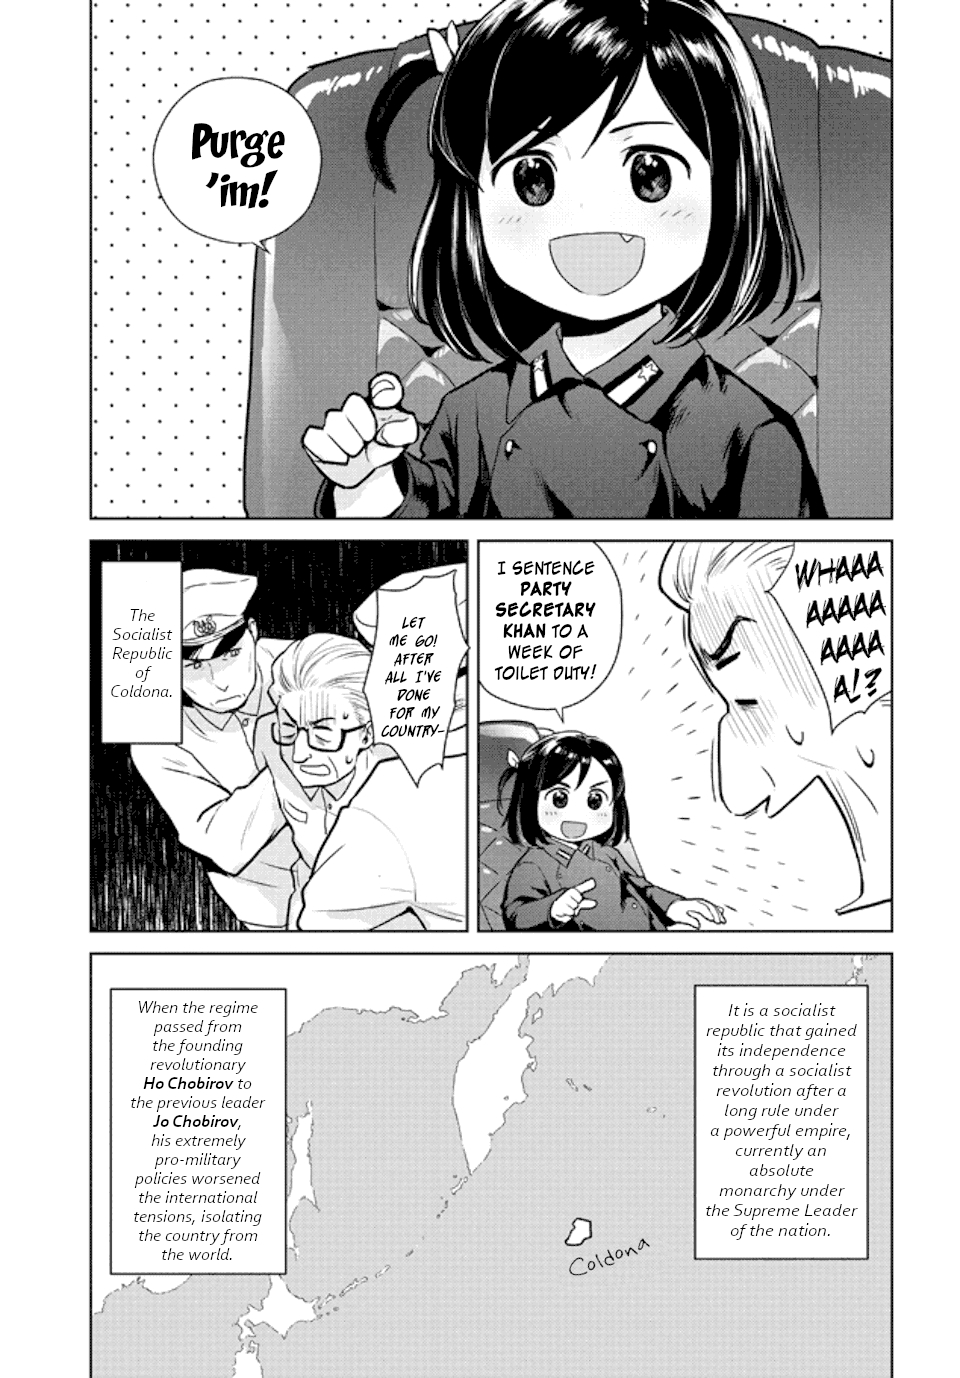 Oh, Our General Myao Ch. 1 In Which Myao Fires Missiles By Mistake